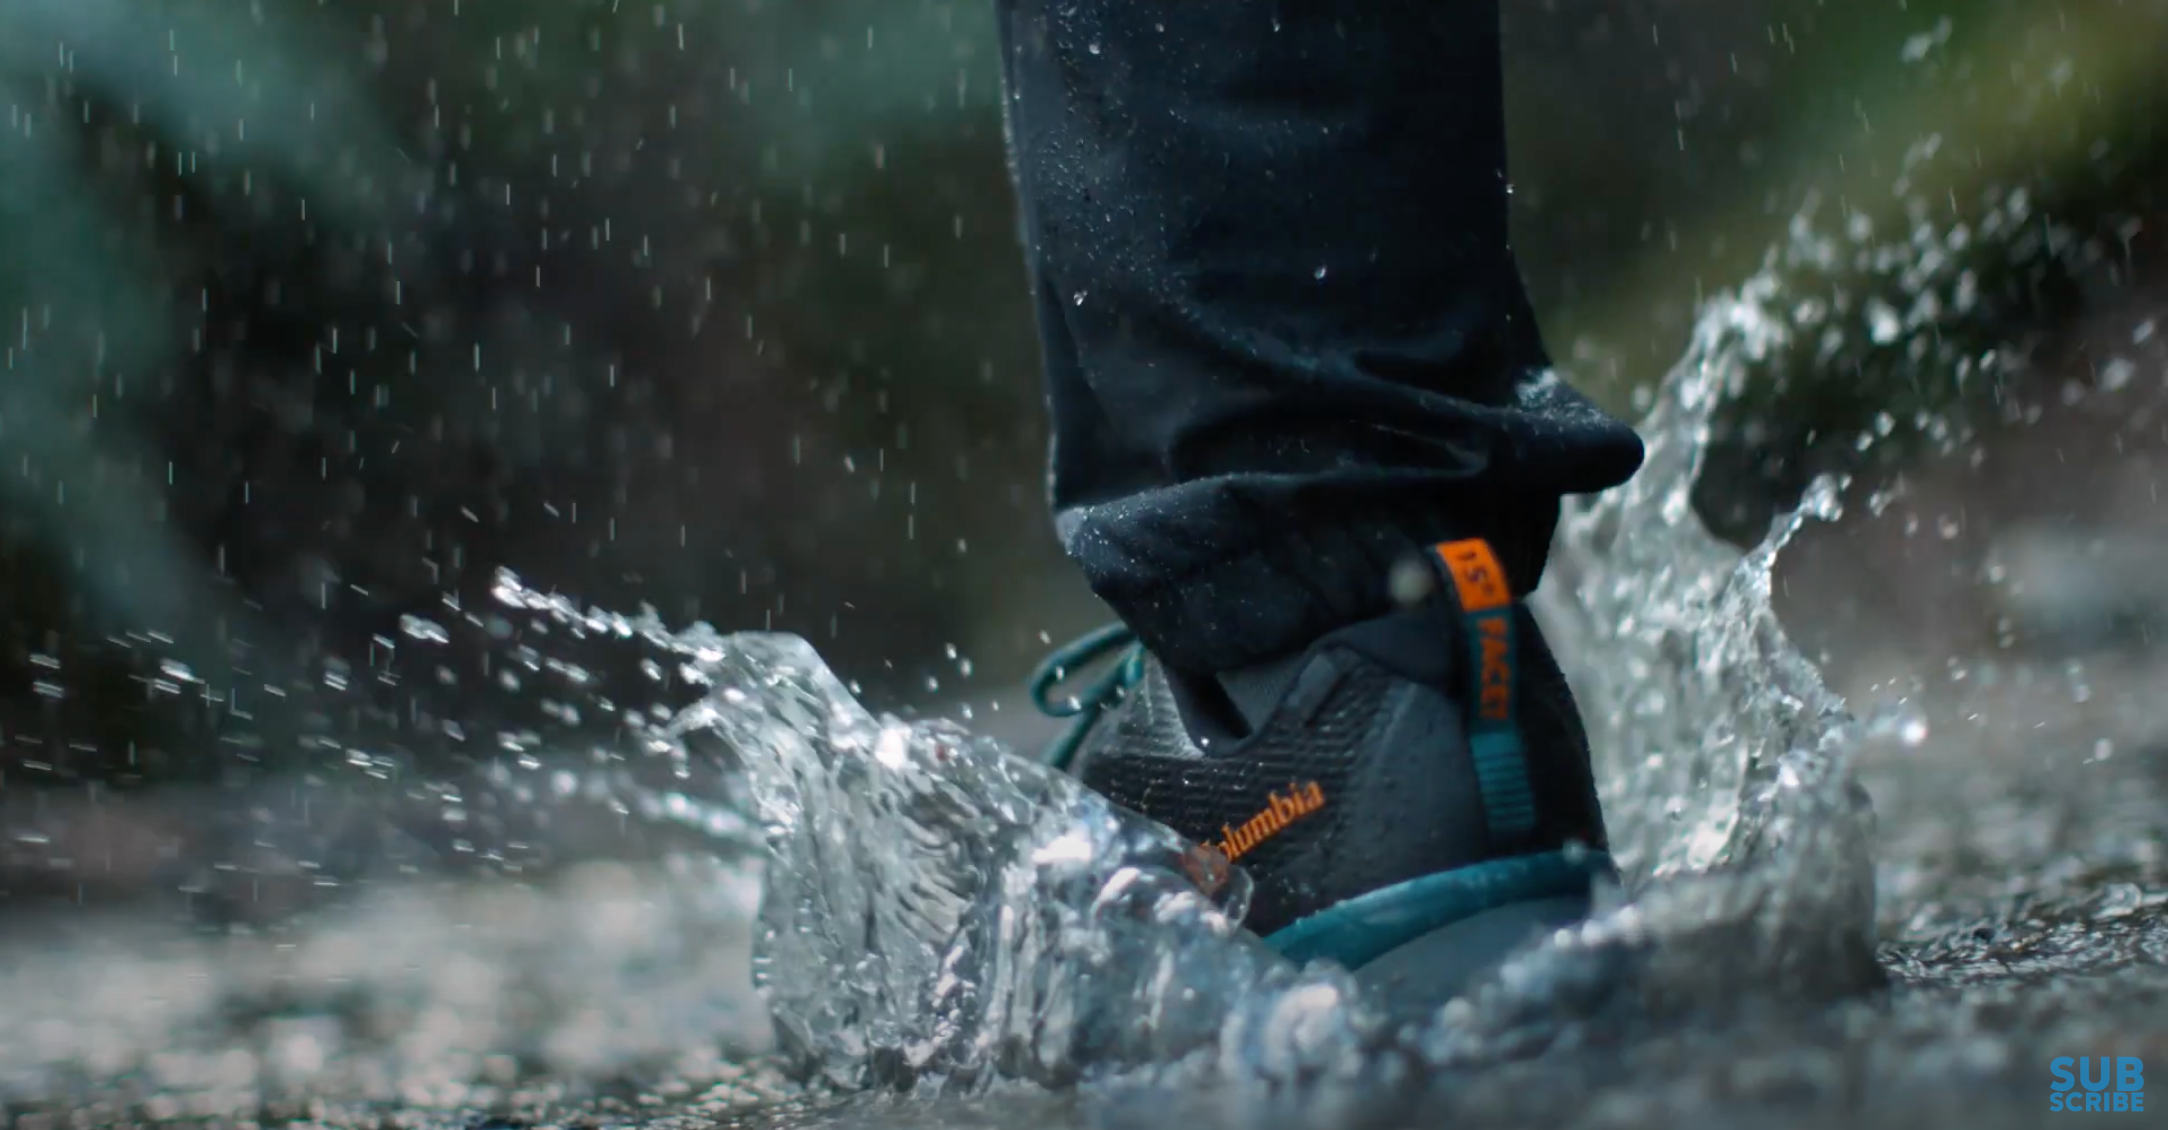 Video link with a waterproof shoe stepping into water. 